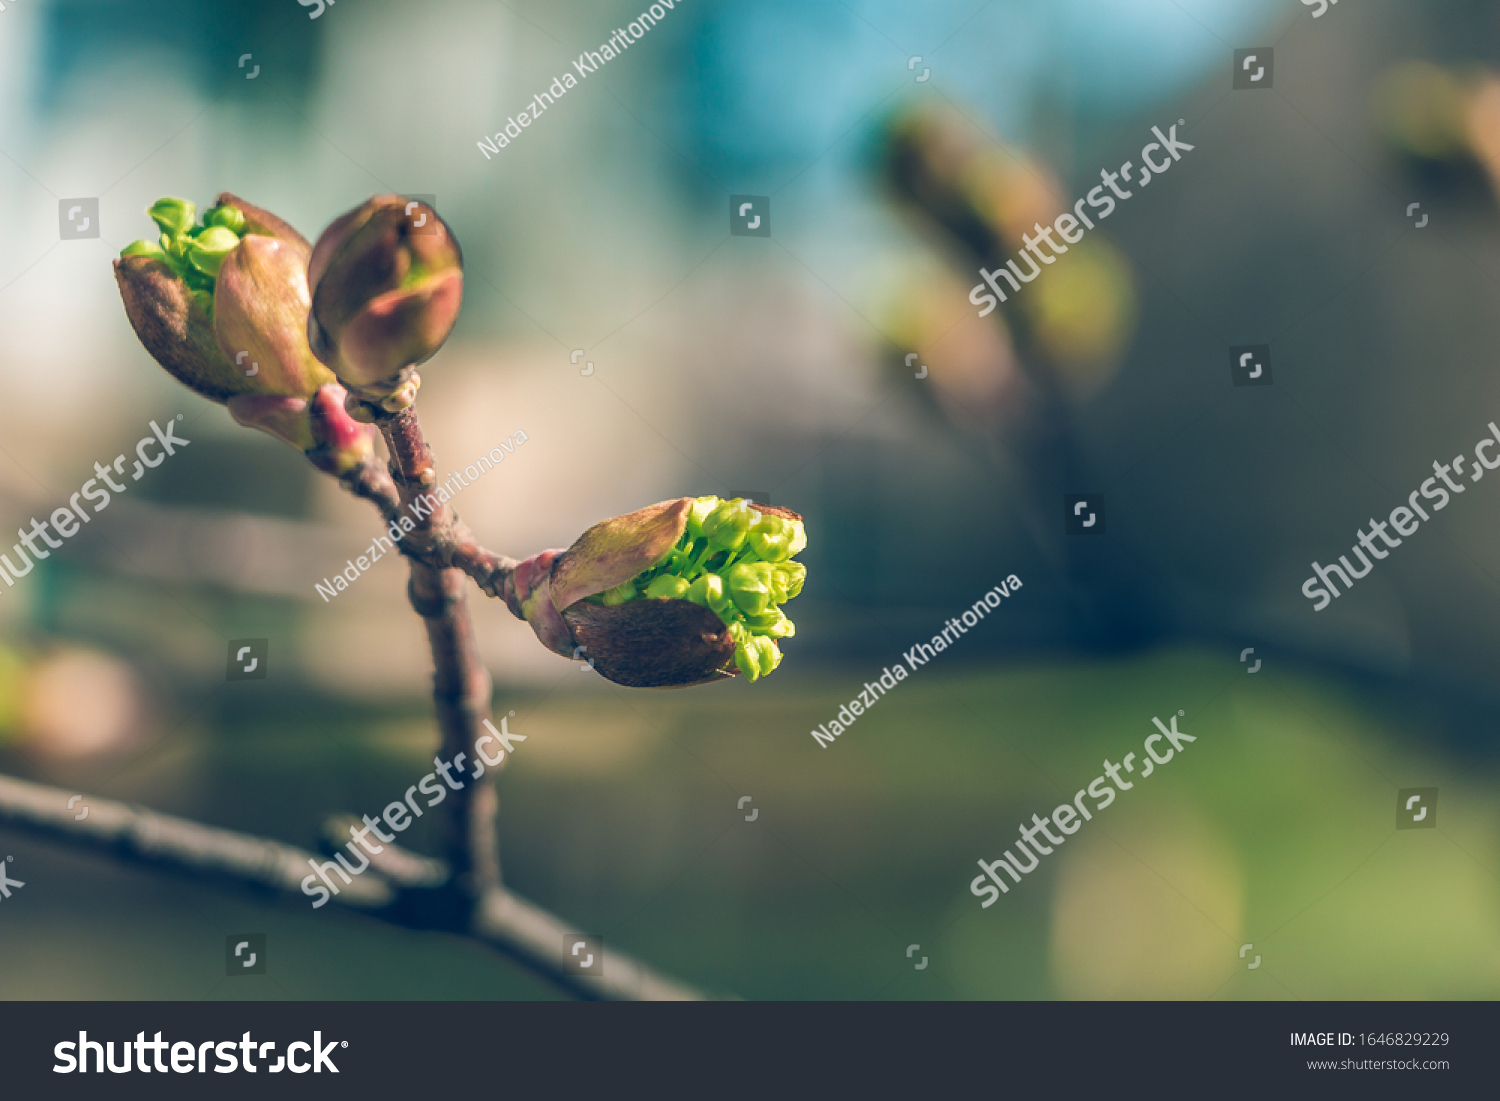 Tree buds in spring. Young large buds on branches against blurred background under the bright sun. Beautiful Fresh spring Natural background. Sunny day. View close up. Few buds for spring theme. #1646829229